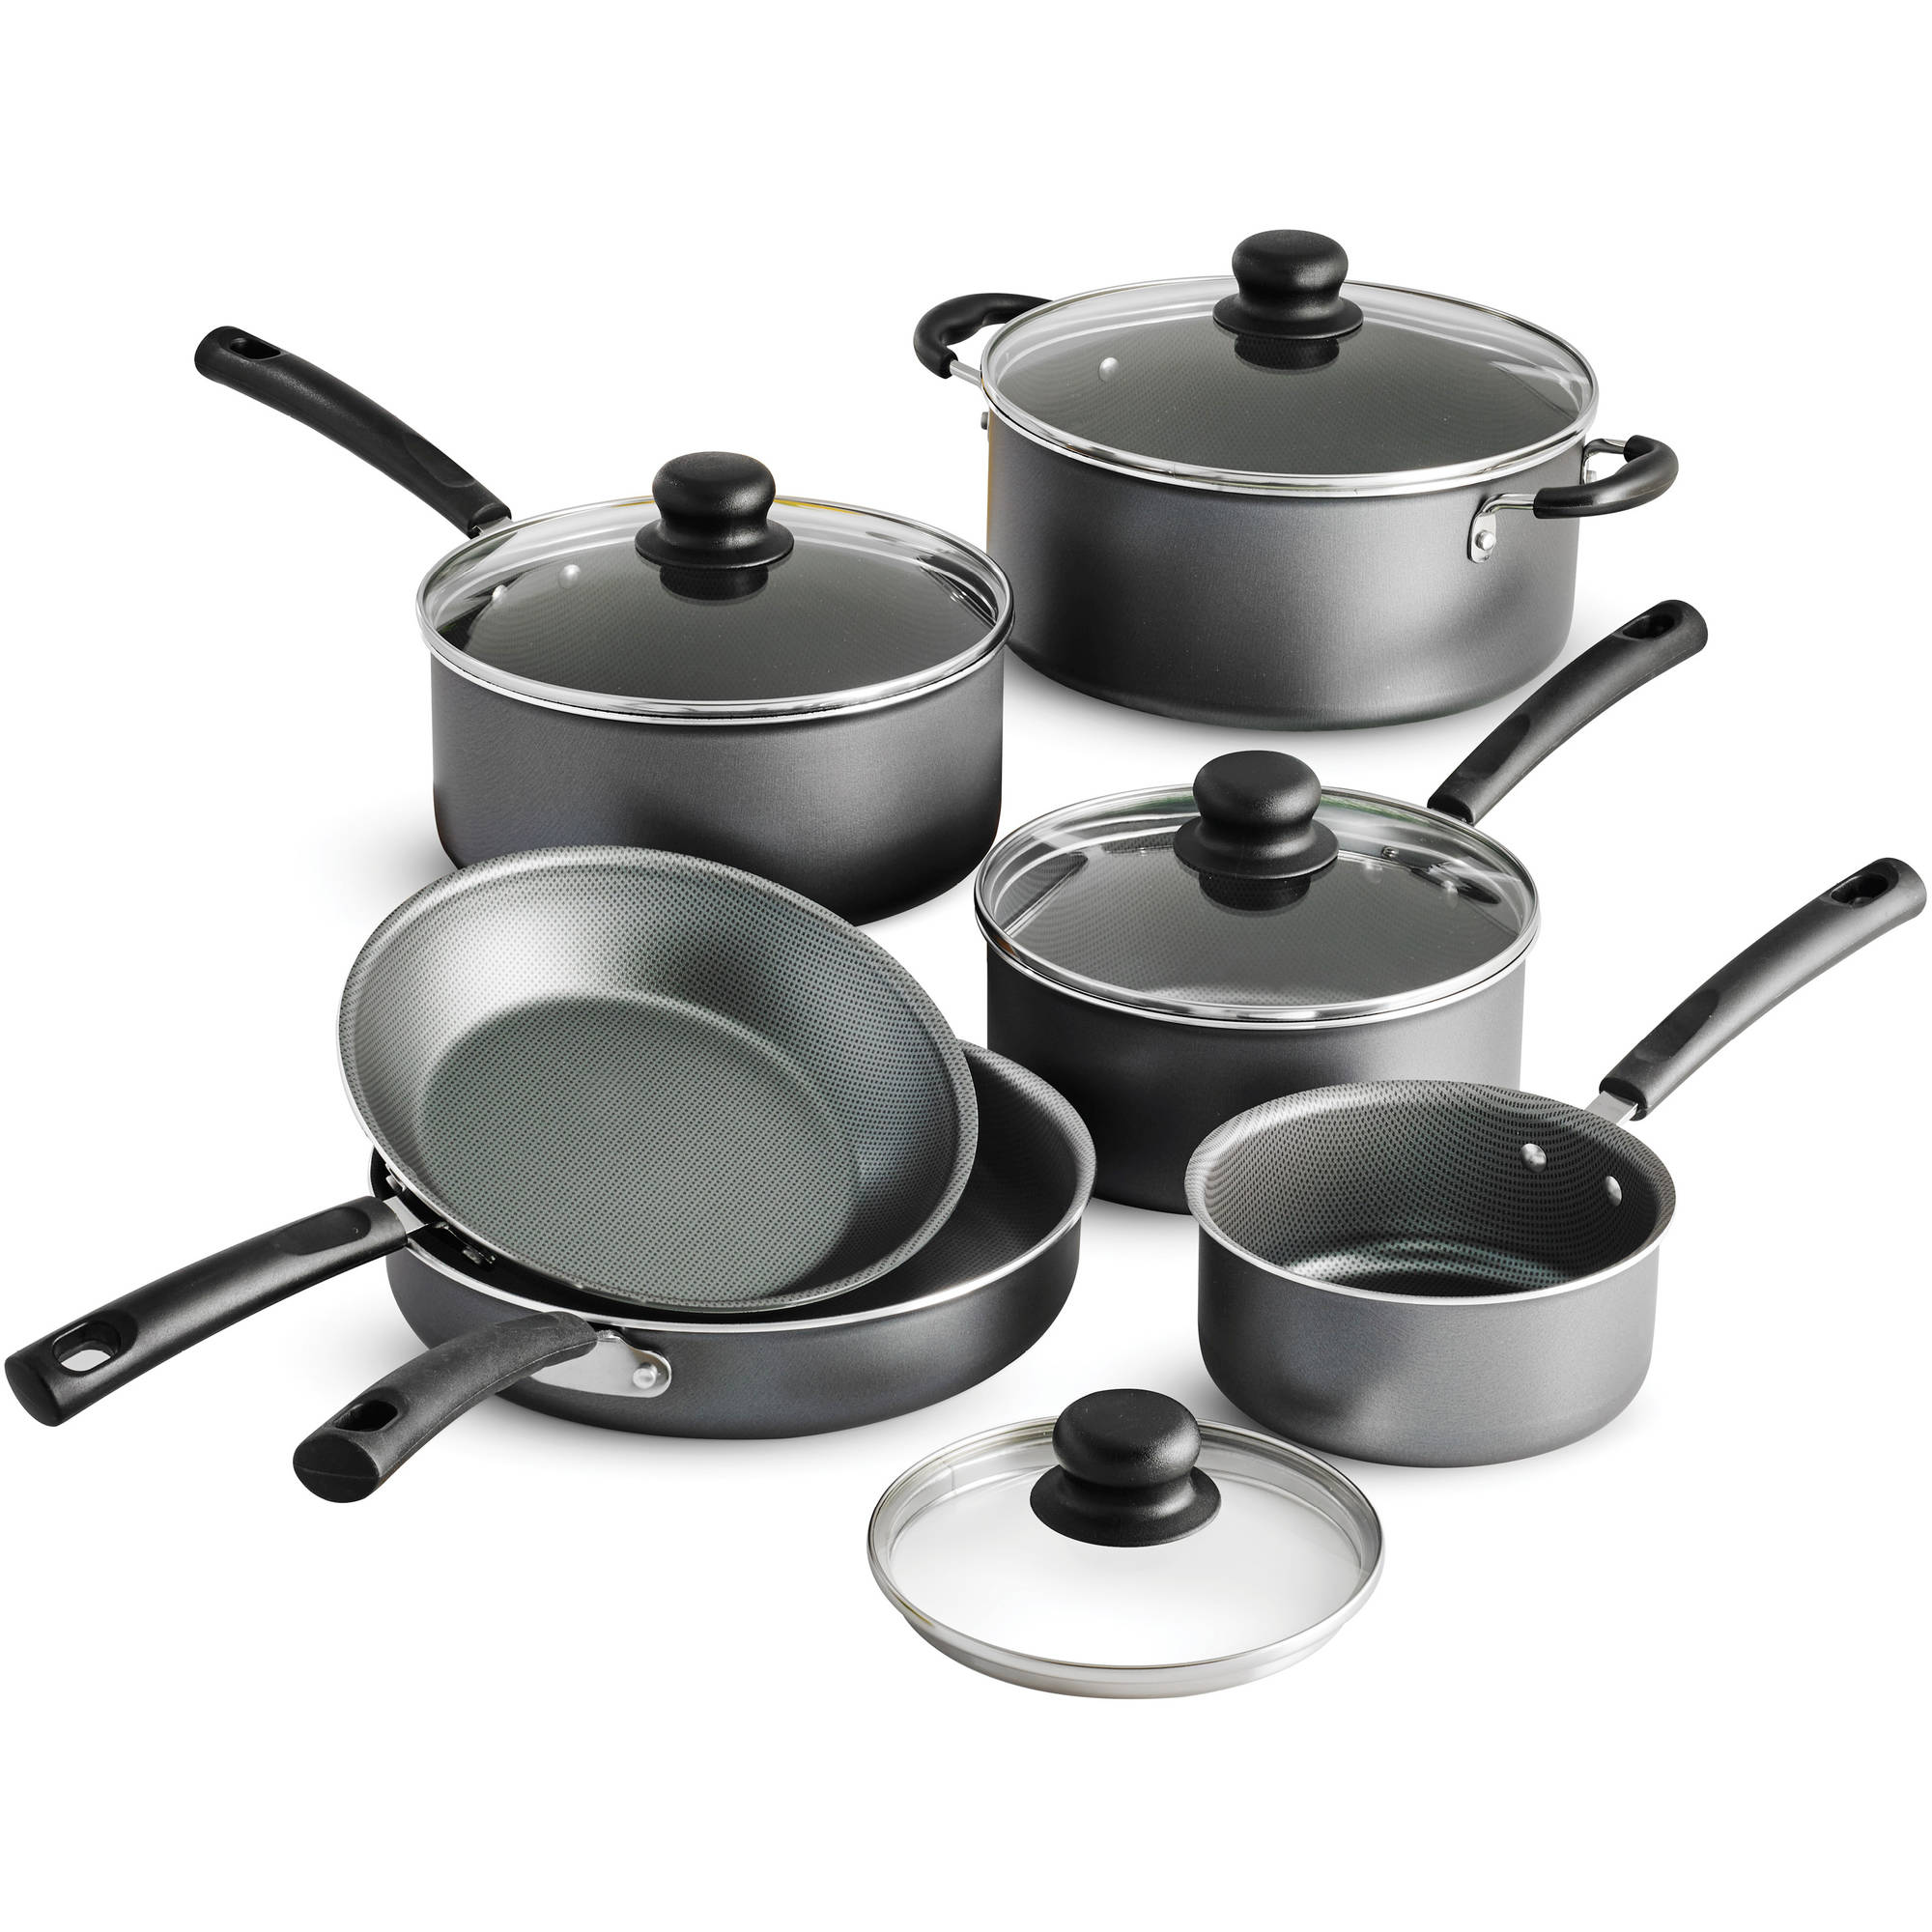 Tramontina Primaware Non-stick Cookware Set, 10 Piece - image 1 of 7